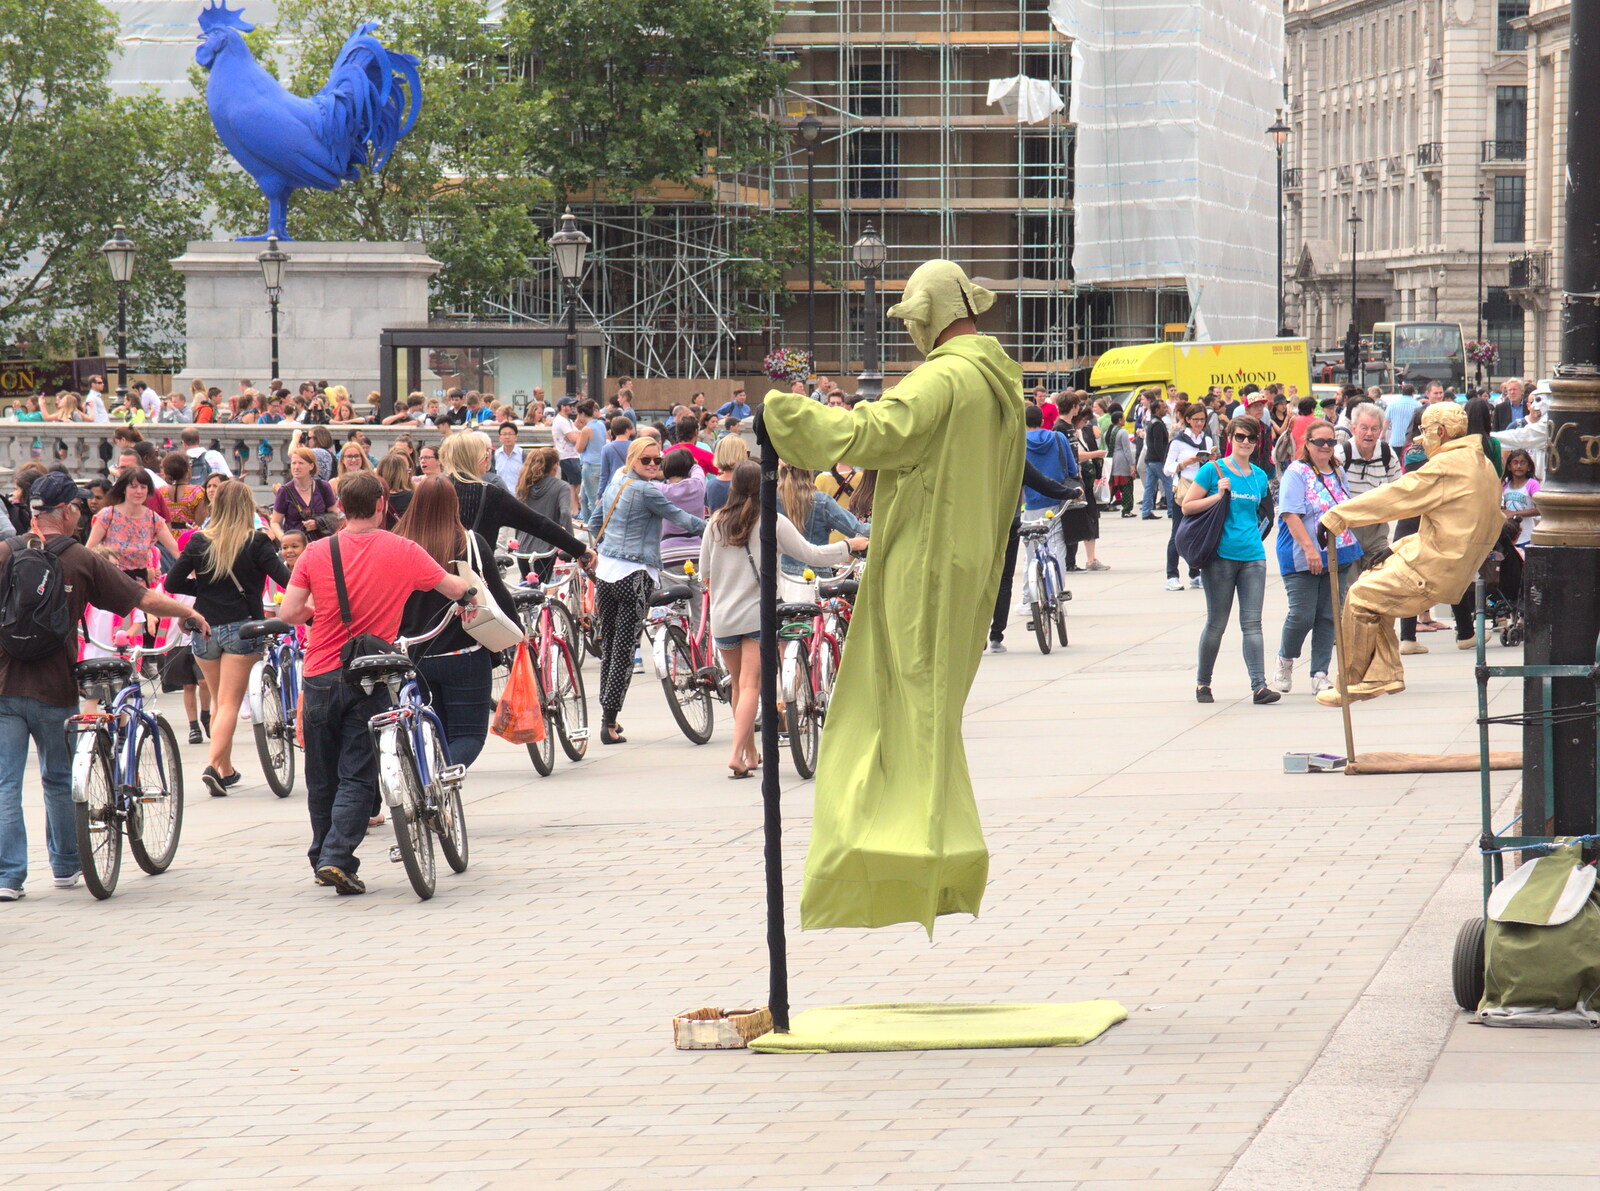 A 'Fat Tire' tour group passes a floating Yoda from SwiftKey Innovation Days, The Haymarket, London - 27th June 2014